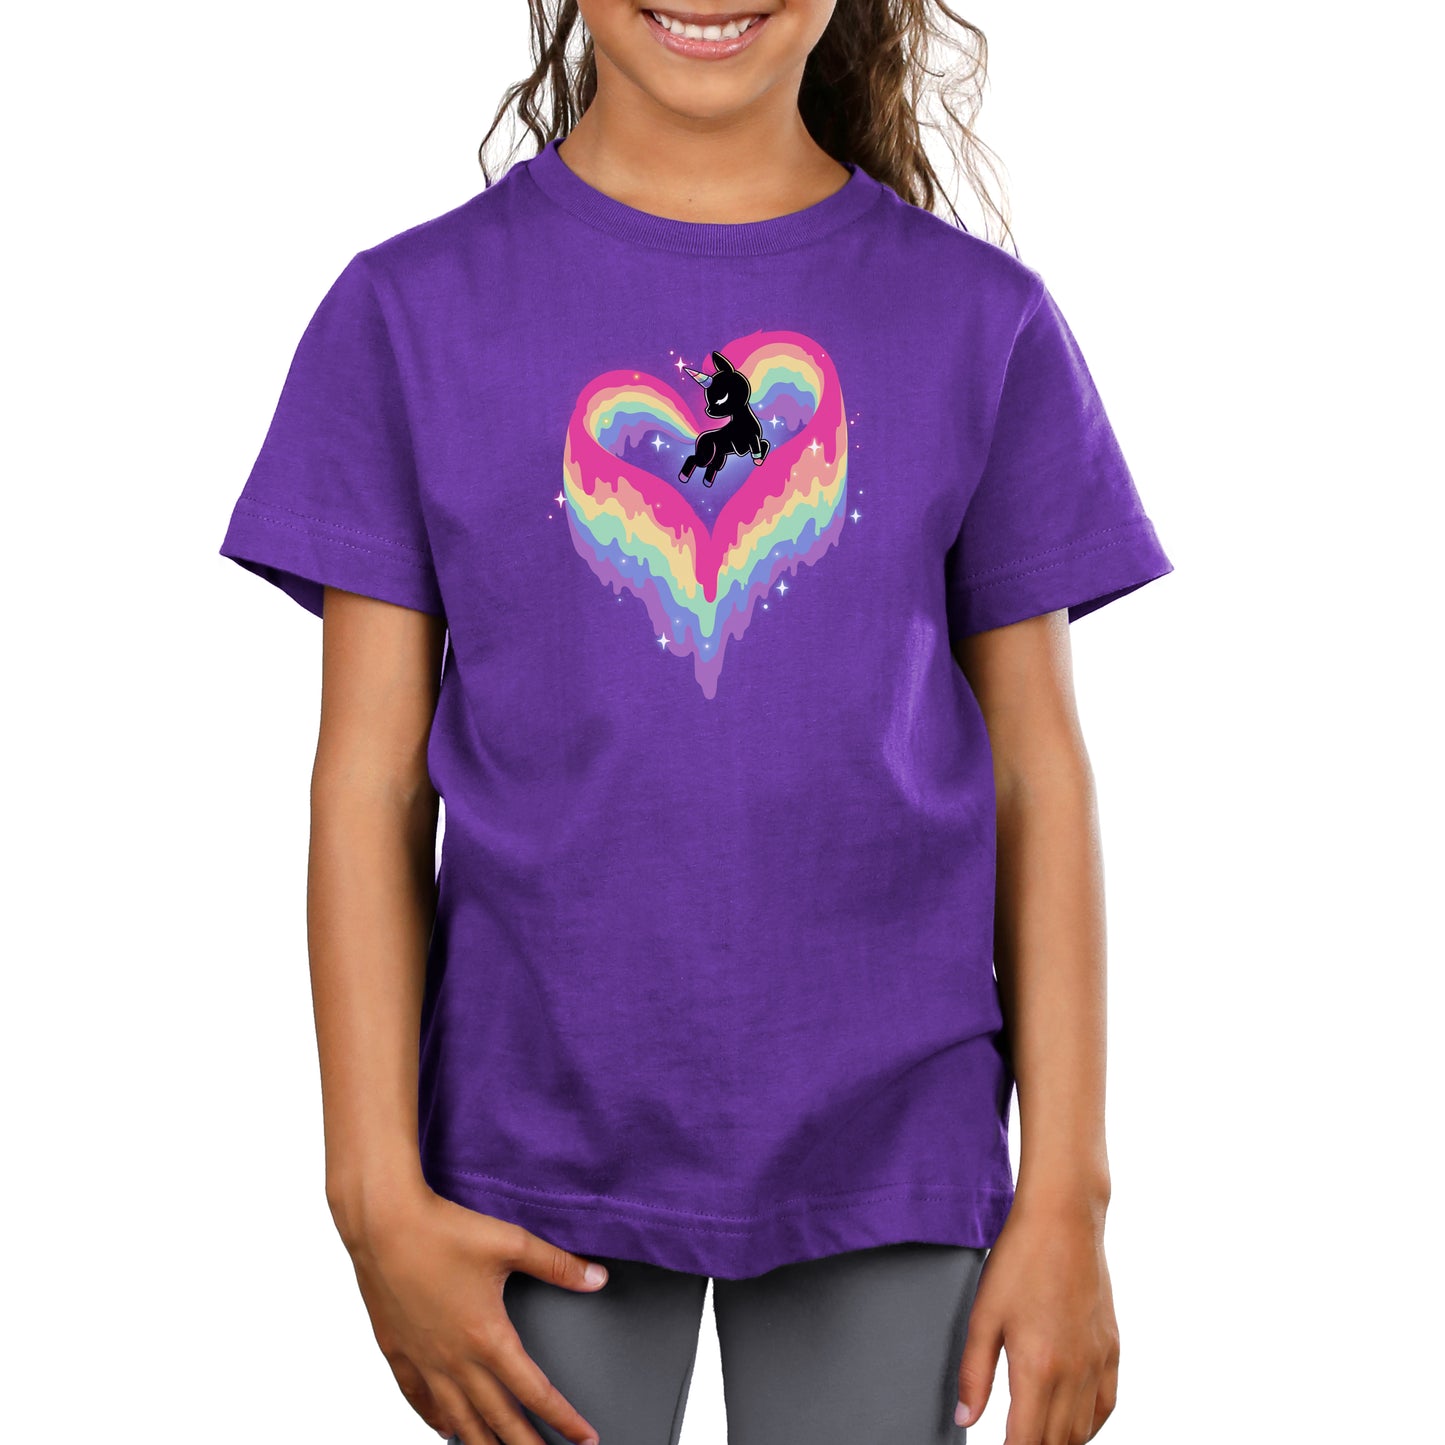 A young girl wearing a monsterdigital super soft ringspun cotton purple T-shirt adorned with a Rainbow Paint Unicorn.